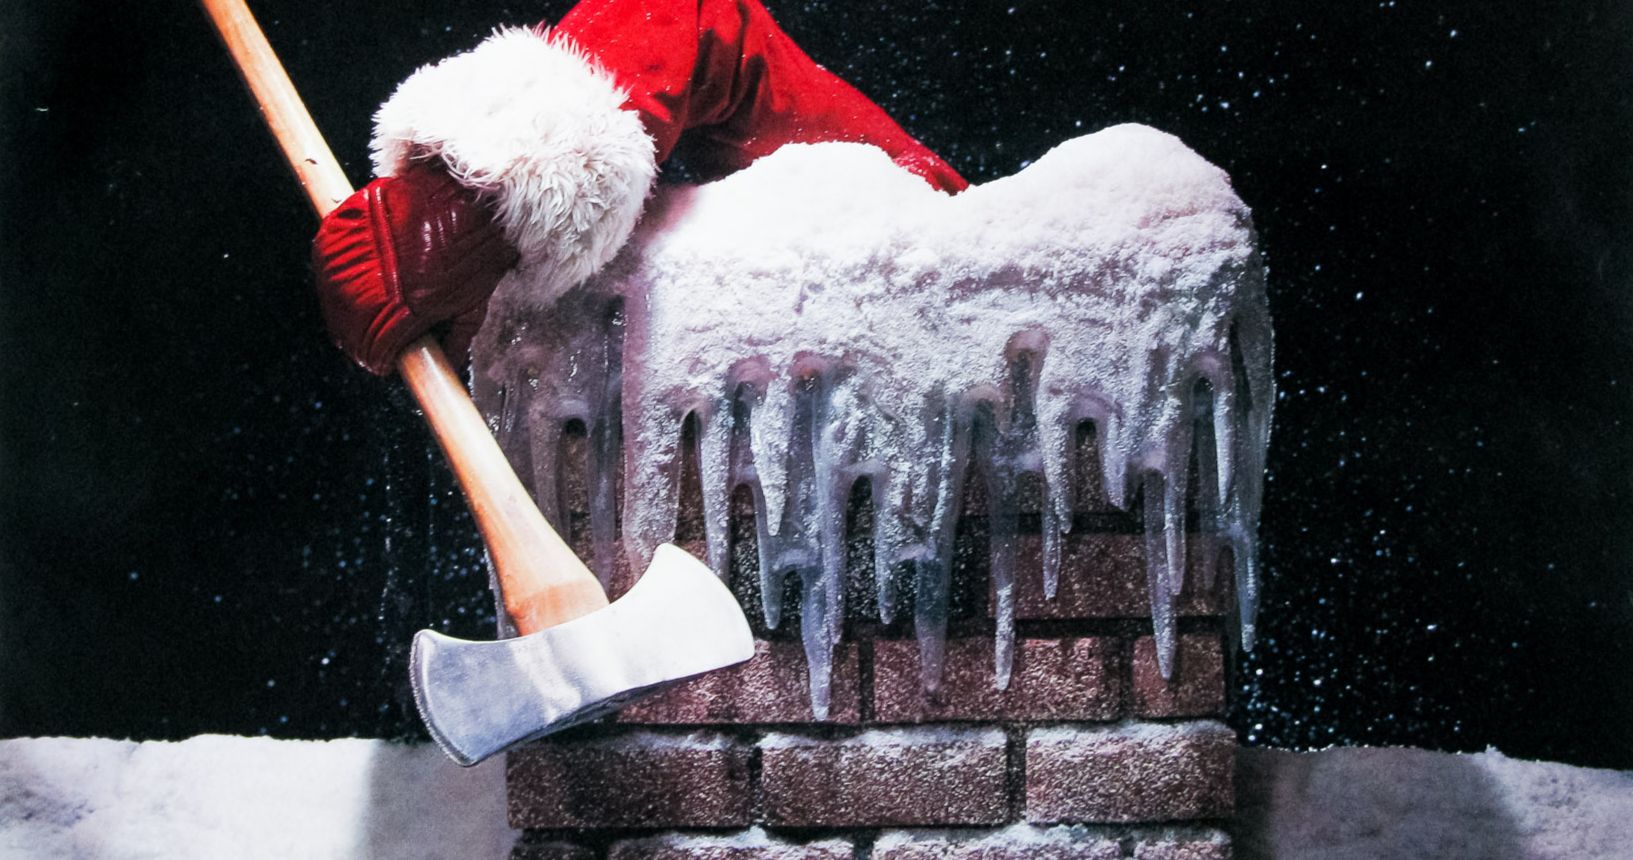 Silent Night, Deadly Night Remake Set for Release in 2022